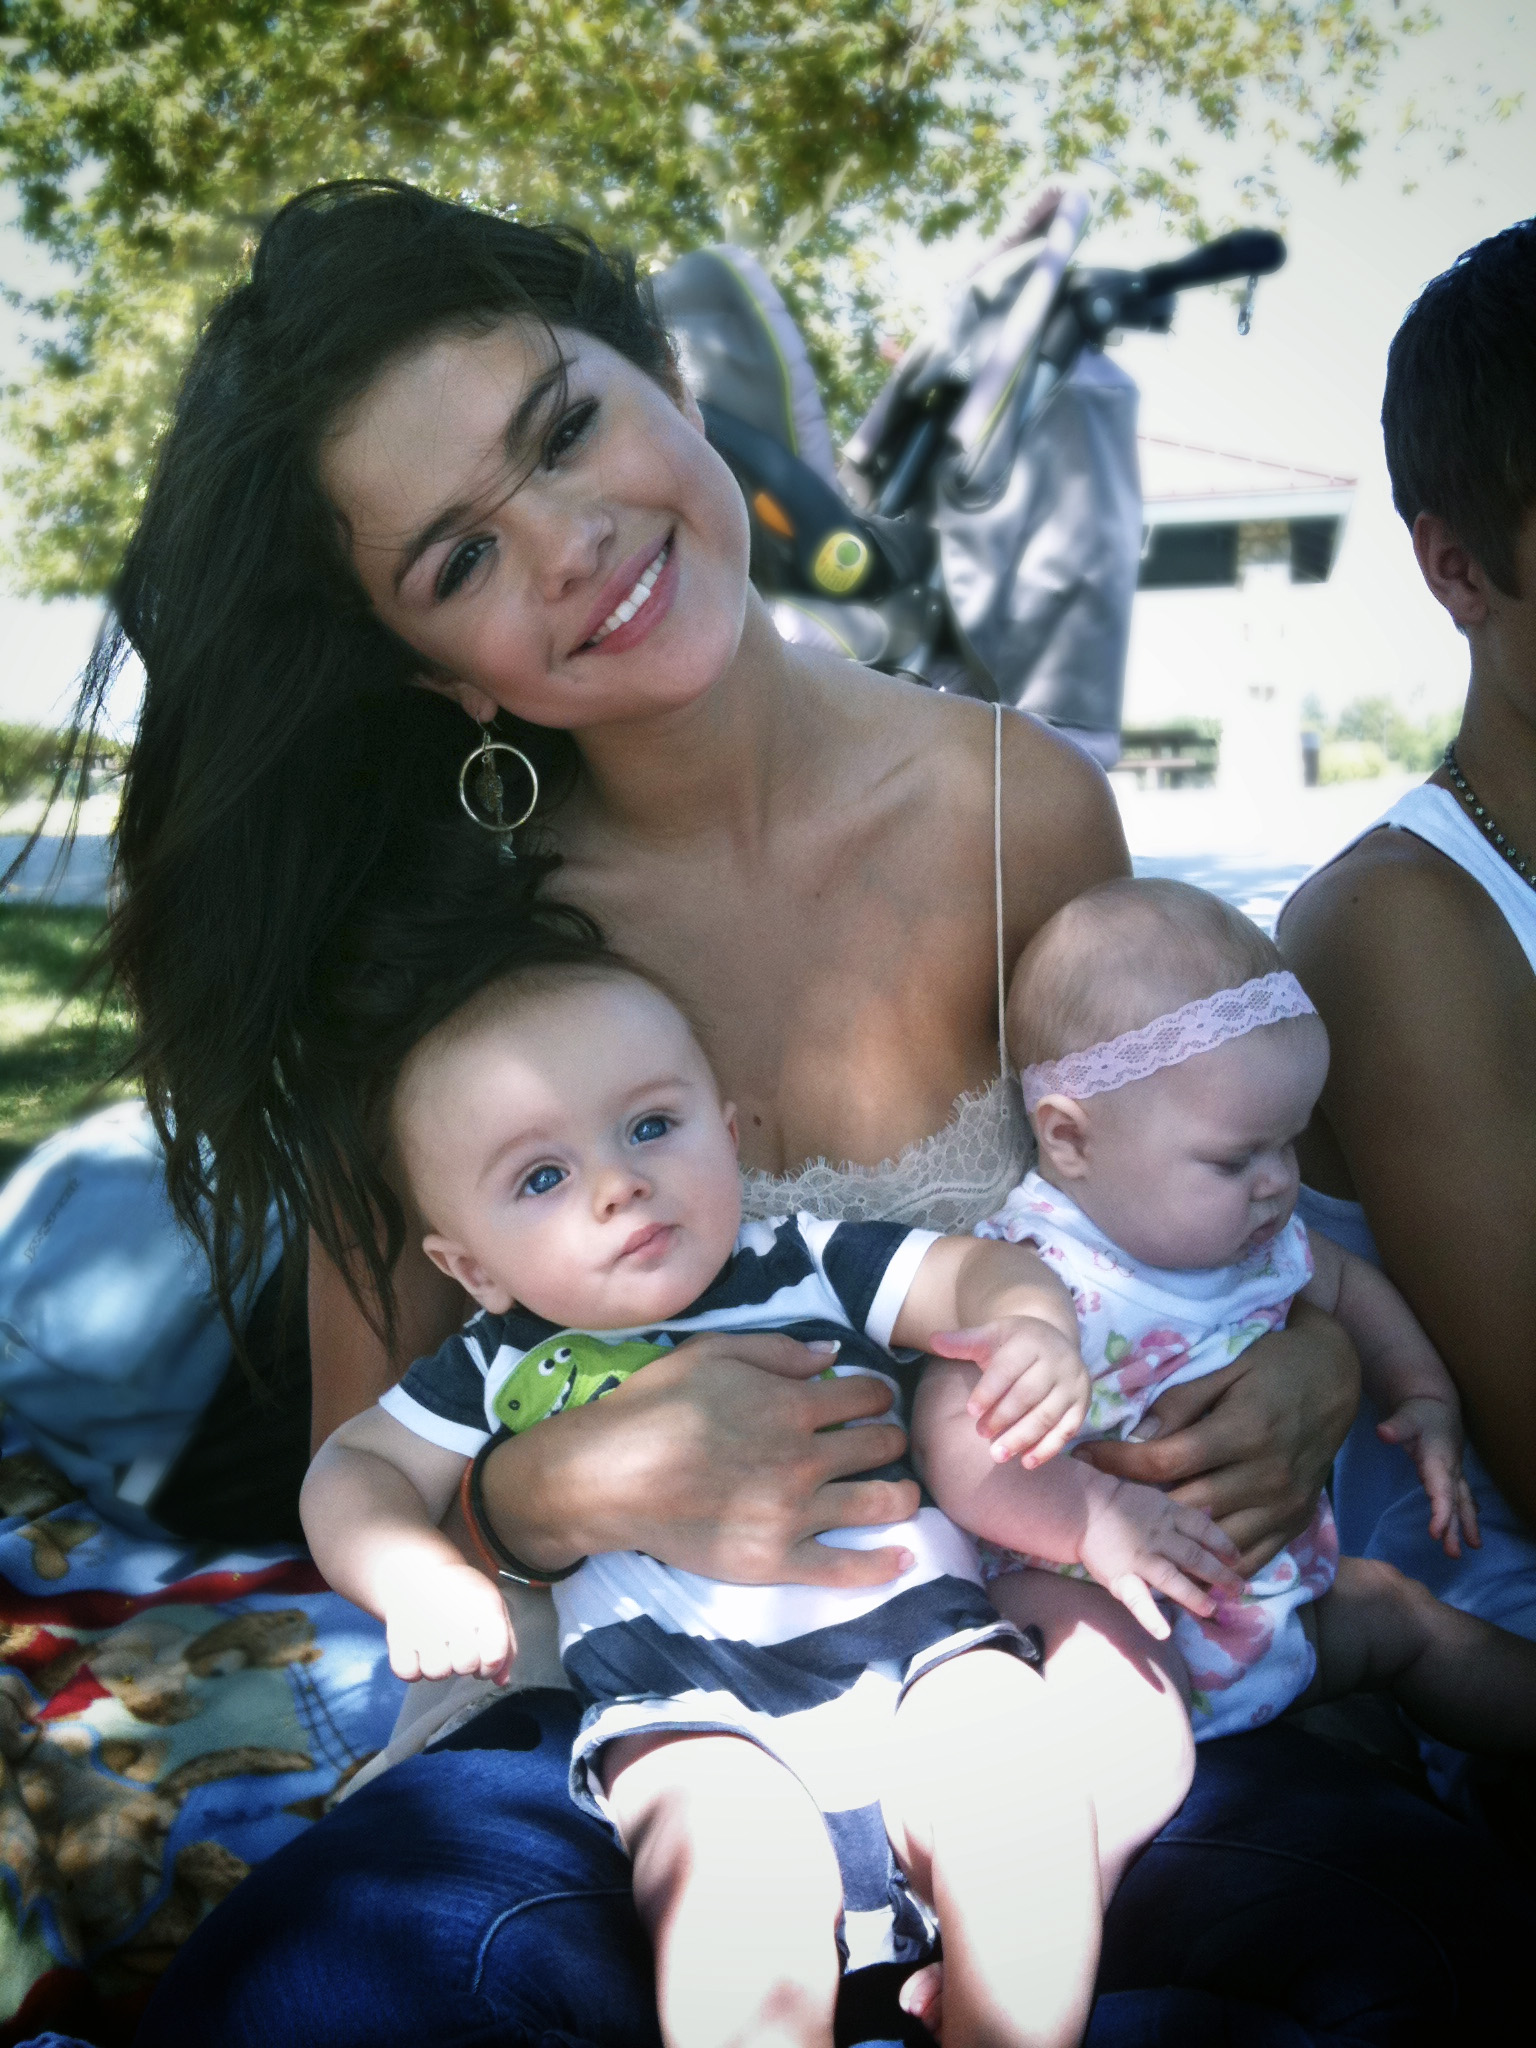 Does Selena Gomez Have A Child